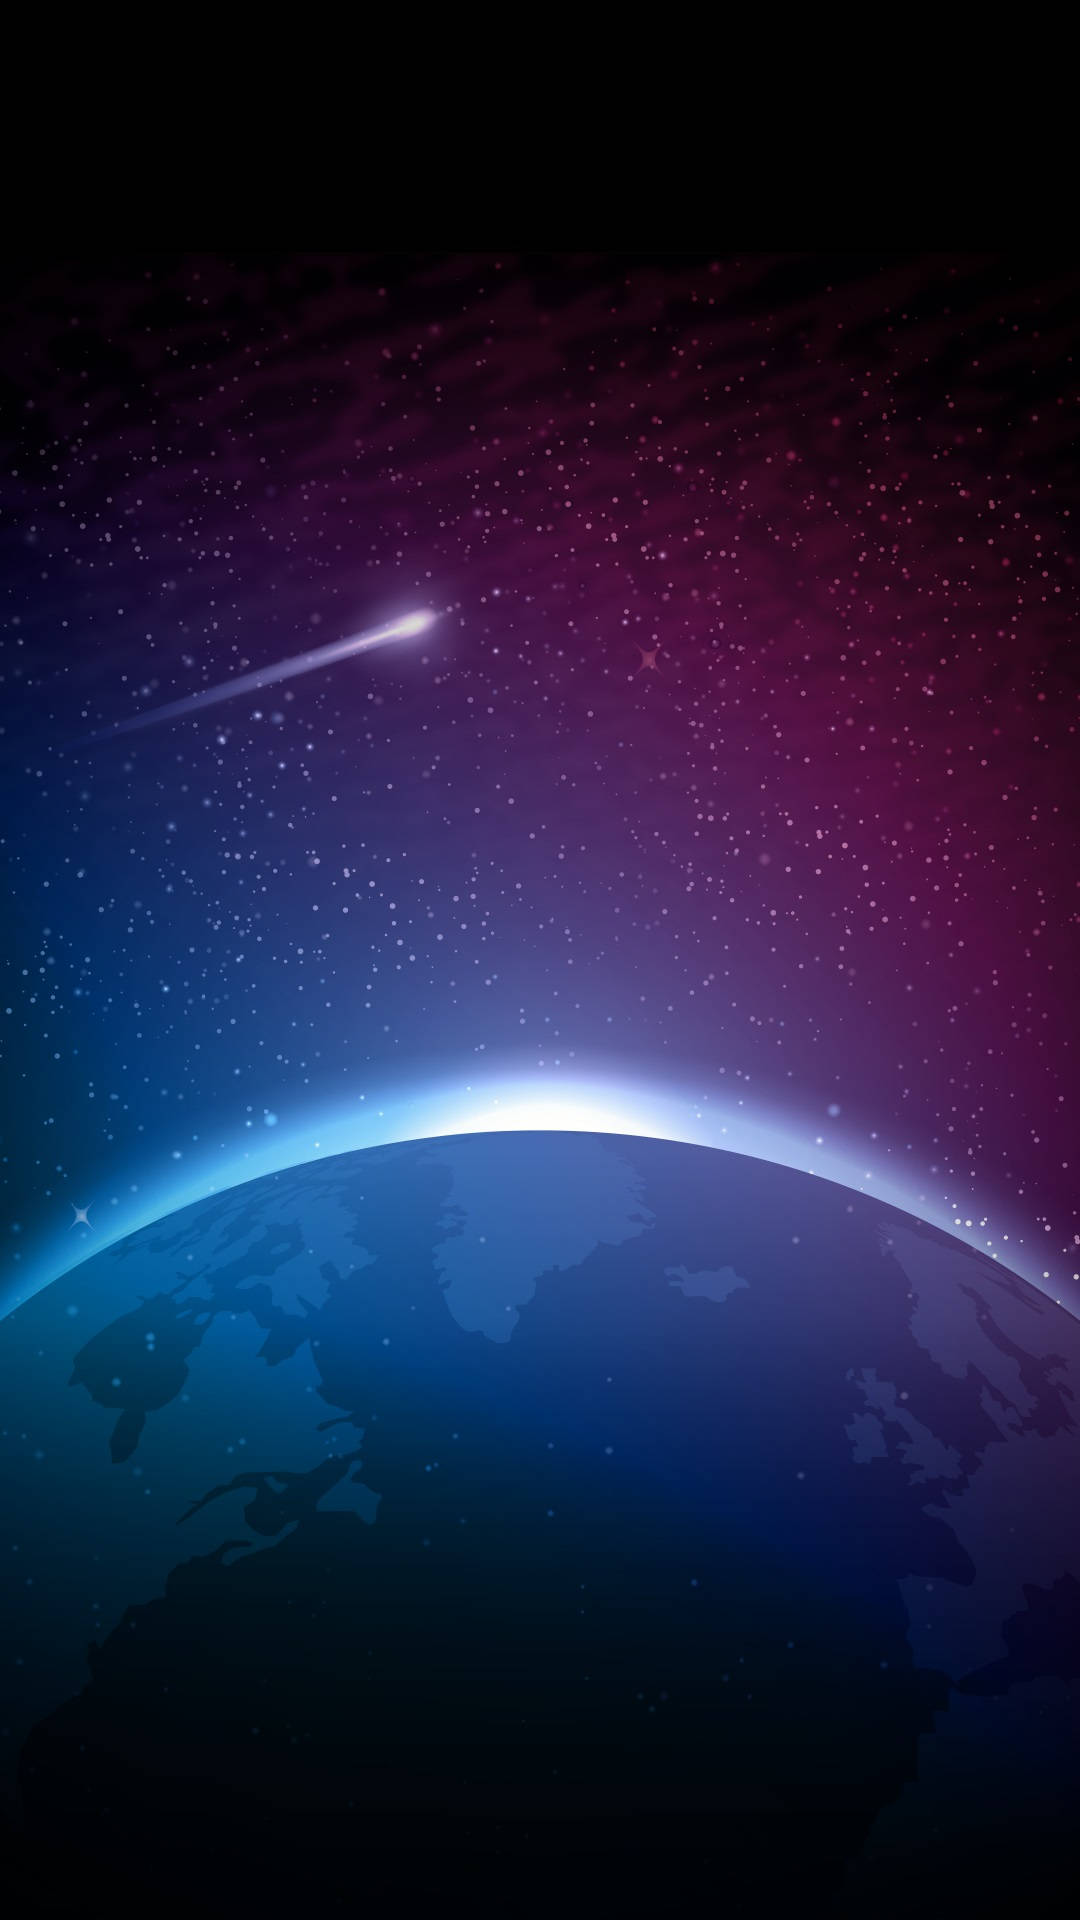 4k Phone Background Shooting Star Over Earth